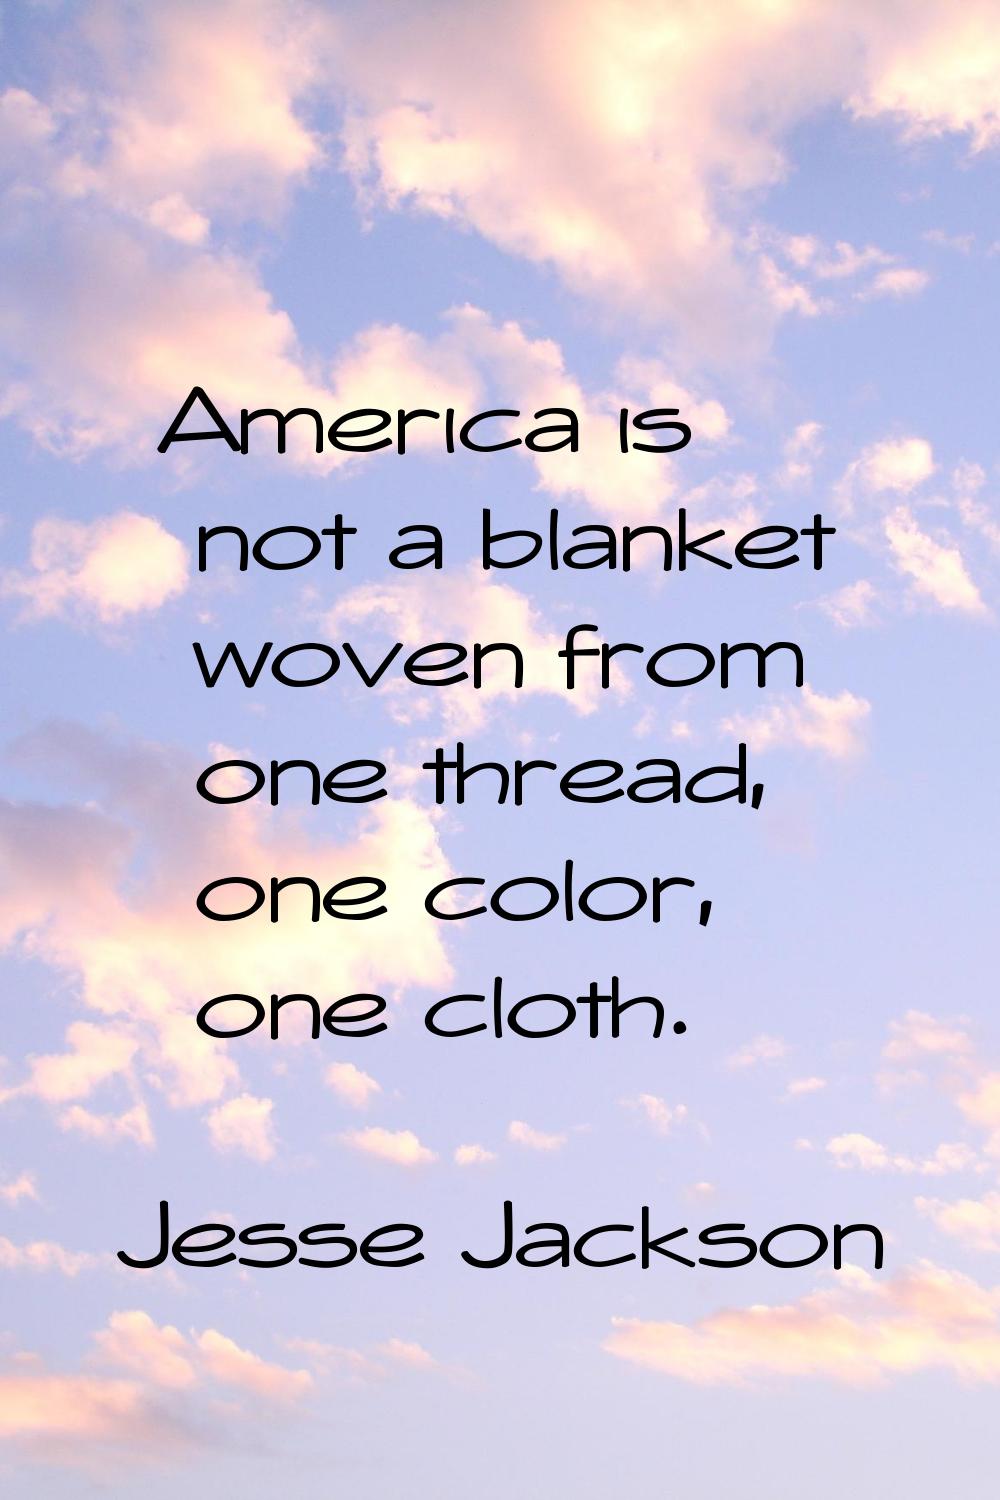 America is not a blanket woven from one thread, one color, one cloth.